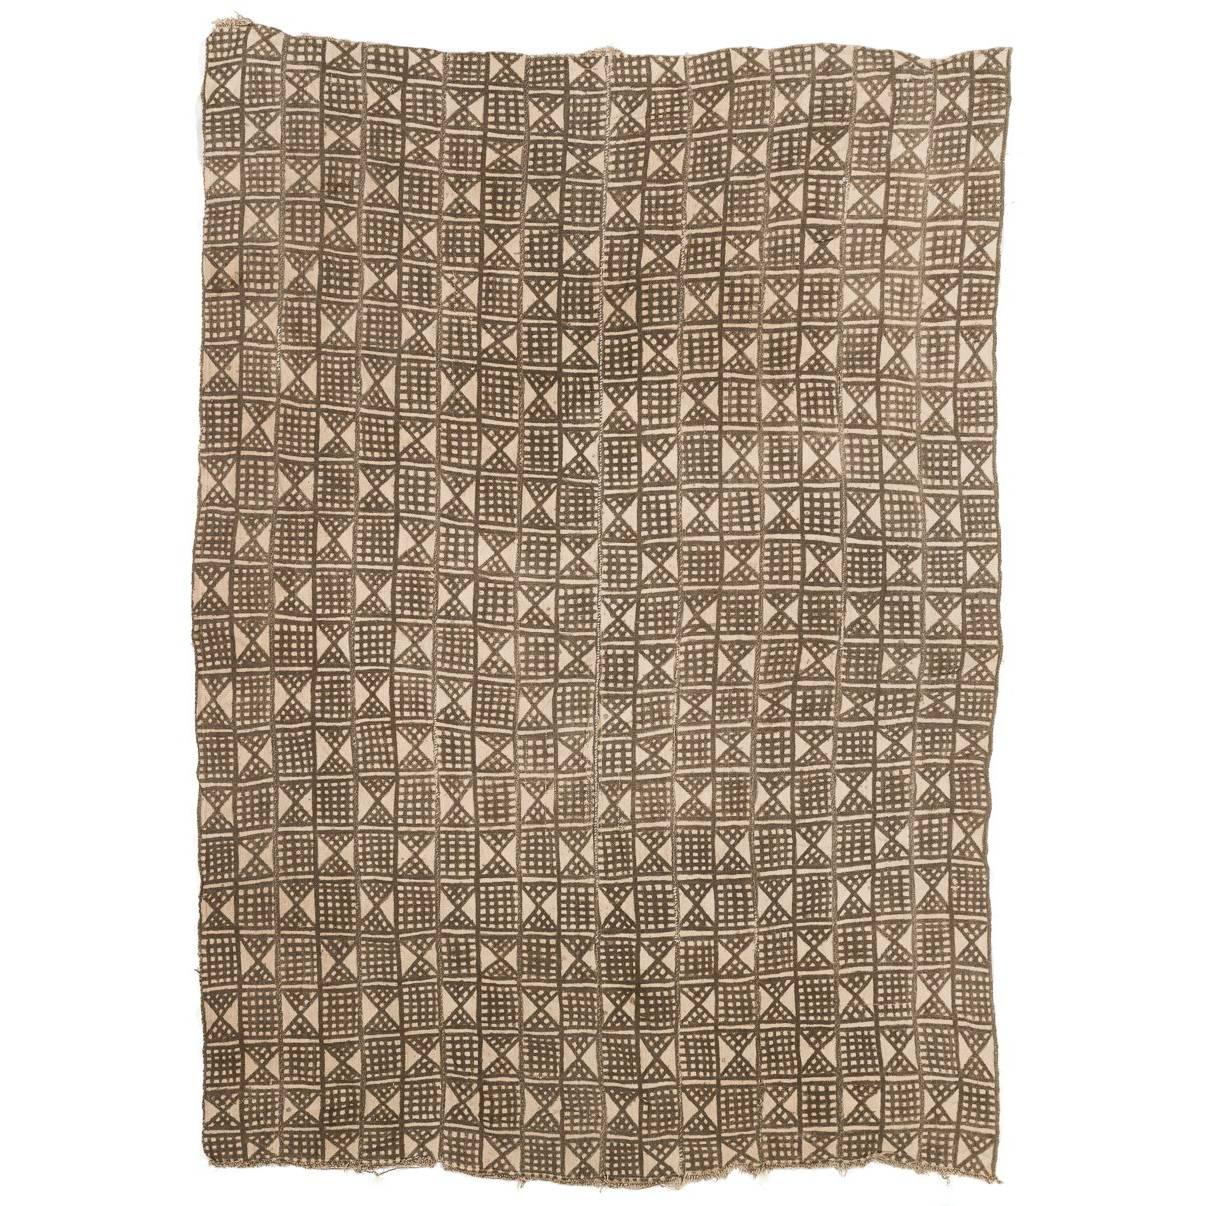 Vintage African Bamana Mud Cloth from Mali